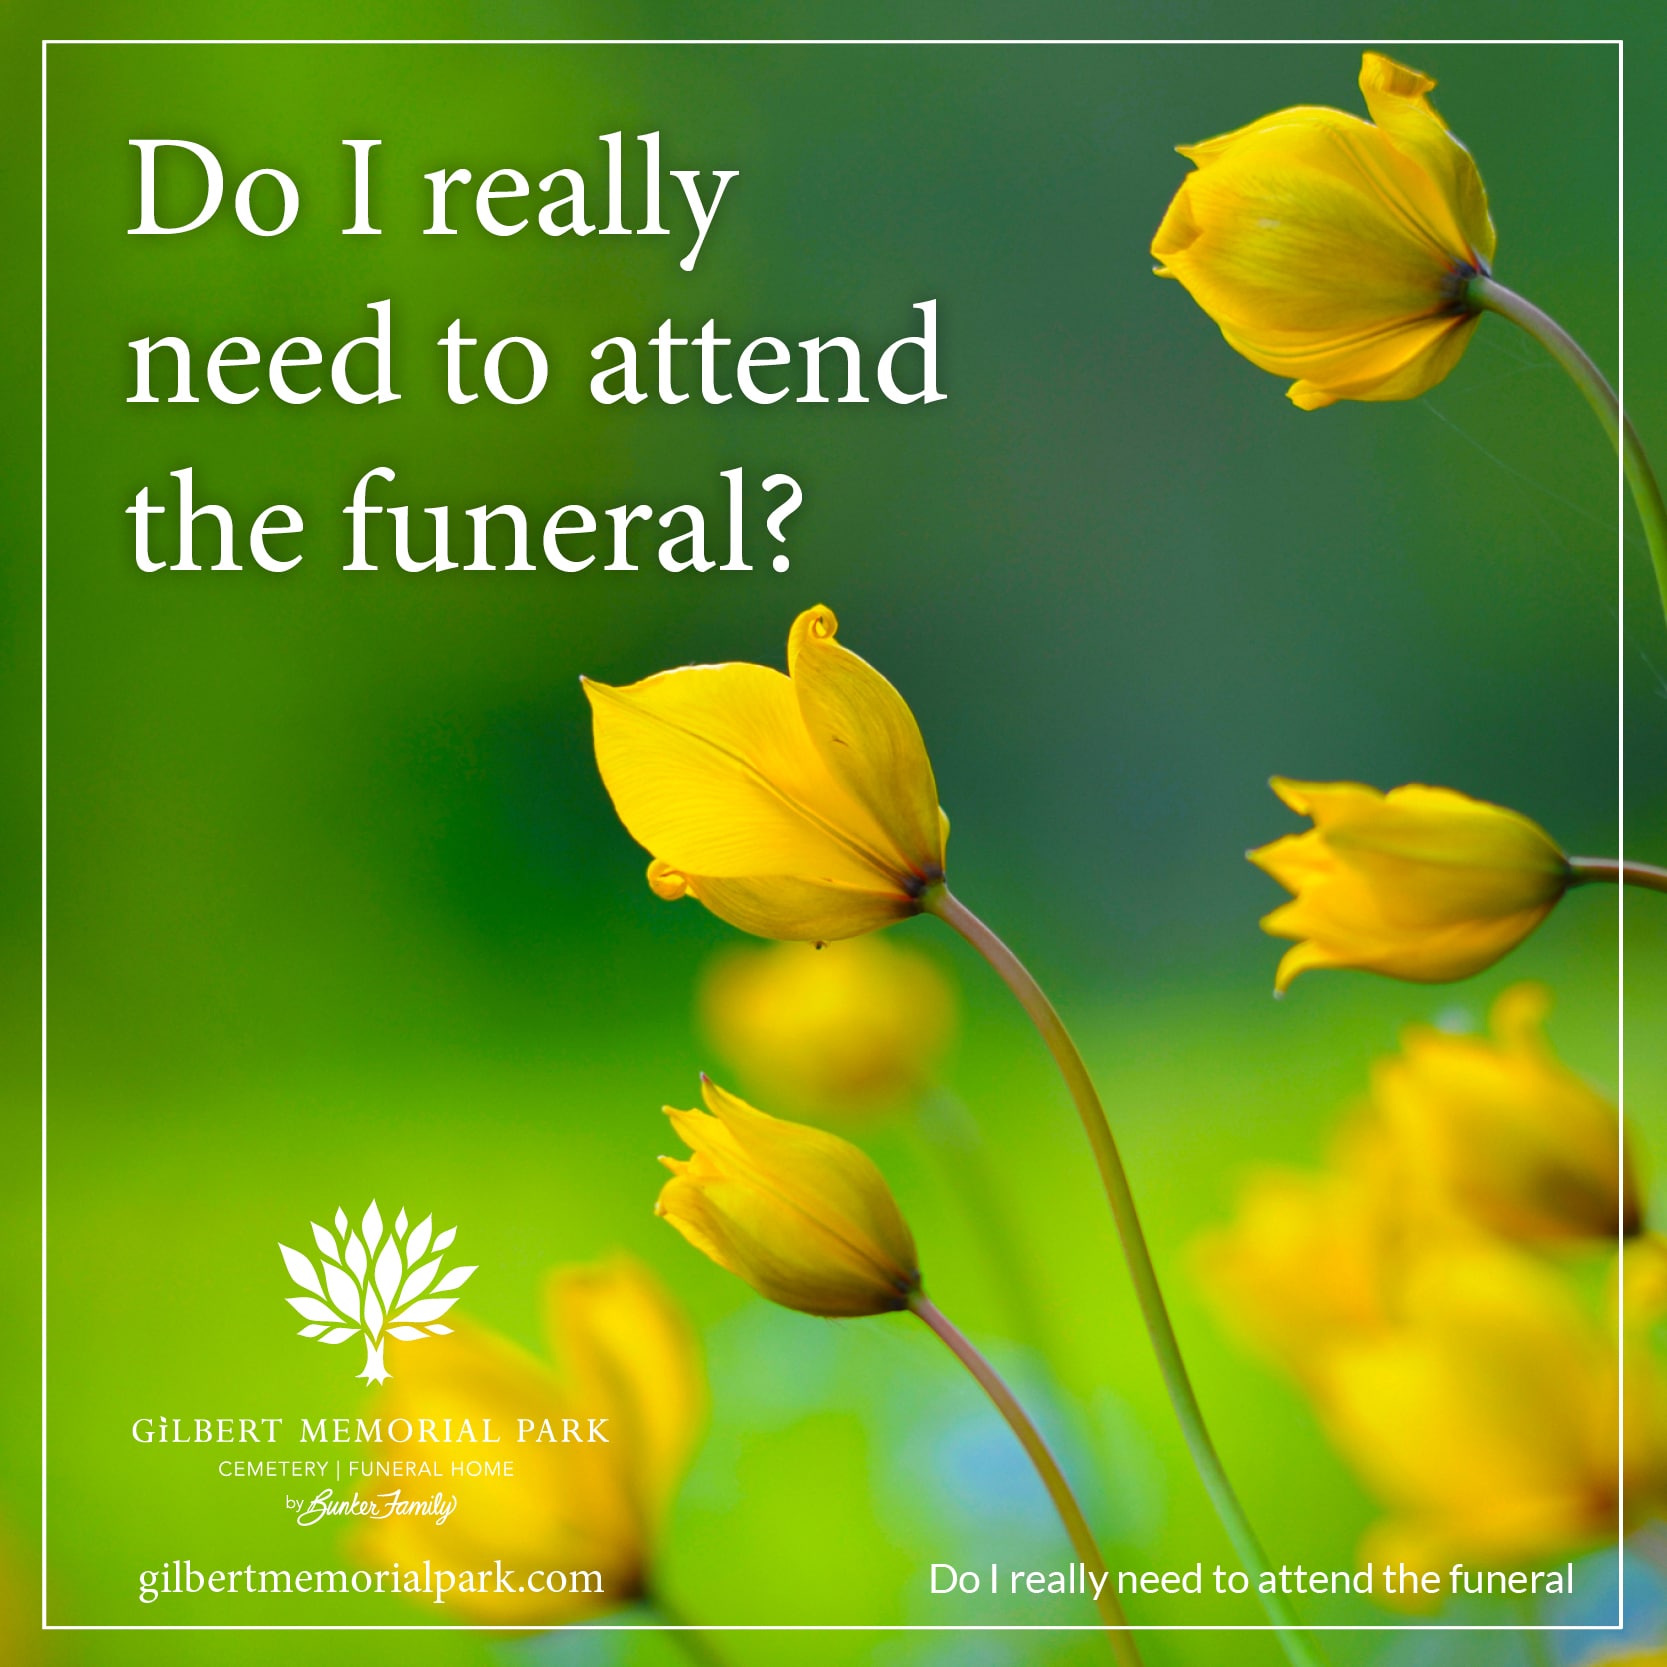 Do I Really Need to Attend the Funeral?